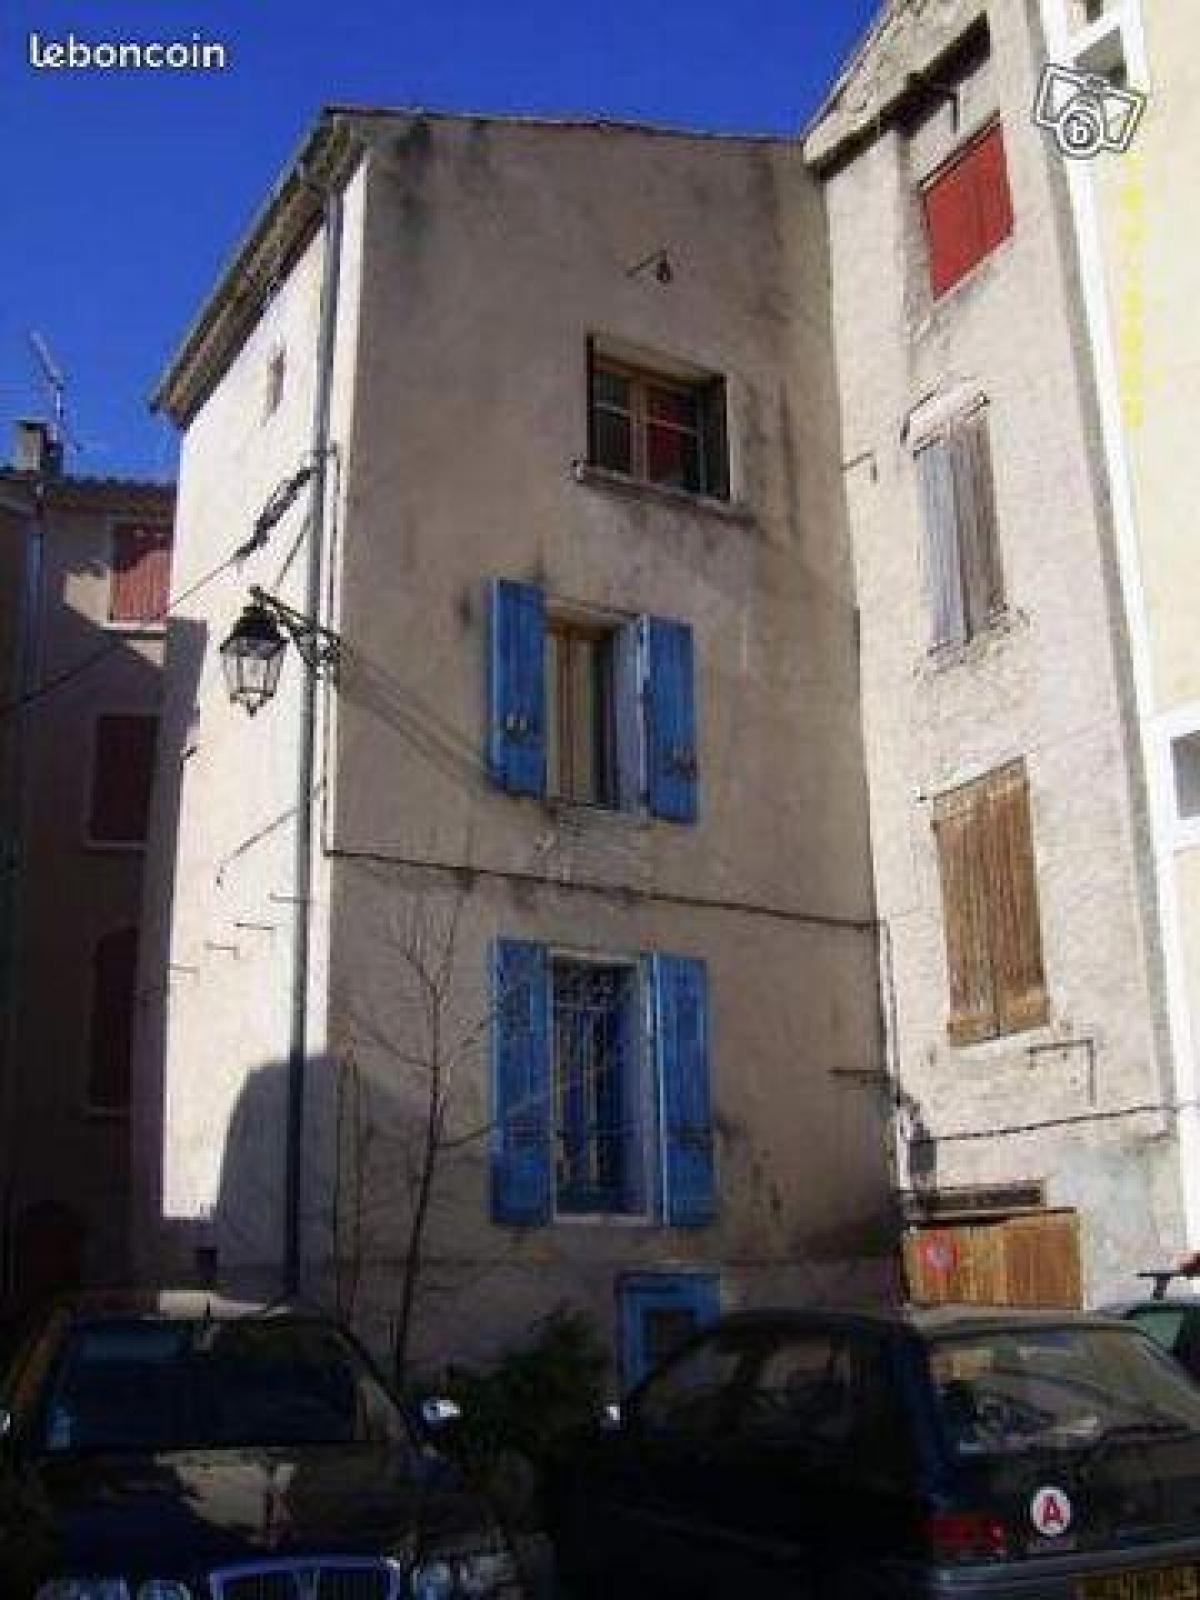 Picture of Home For Sale in Forcalquier, Provence-Alpes-Cote d'Azur, France